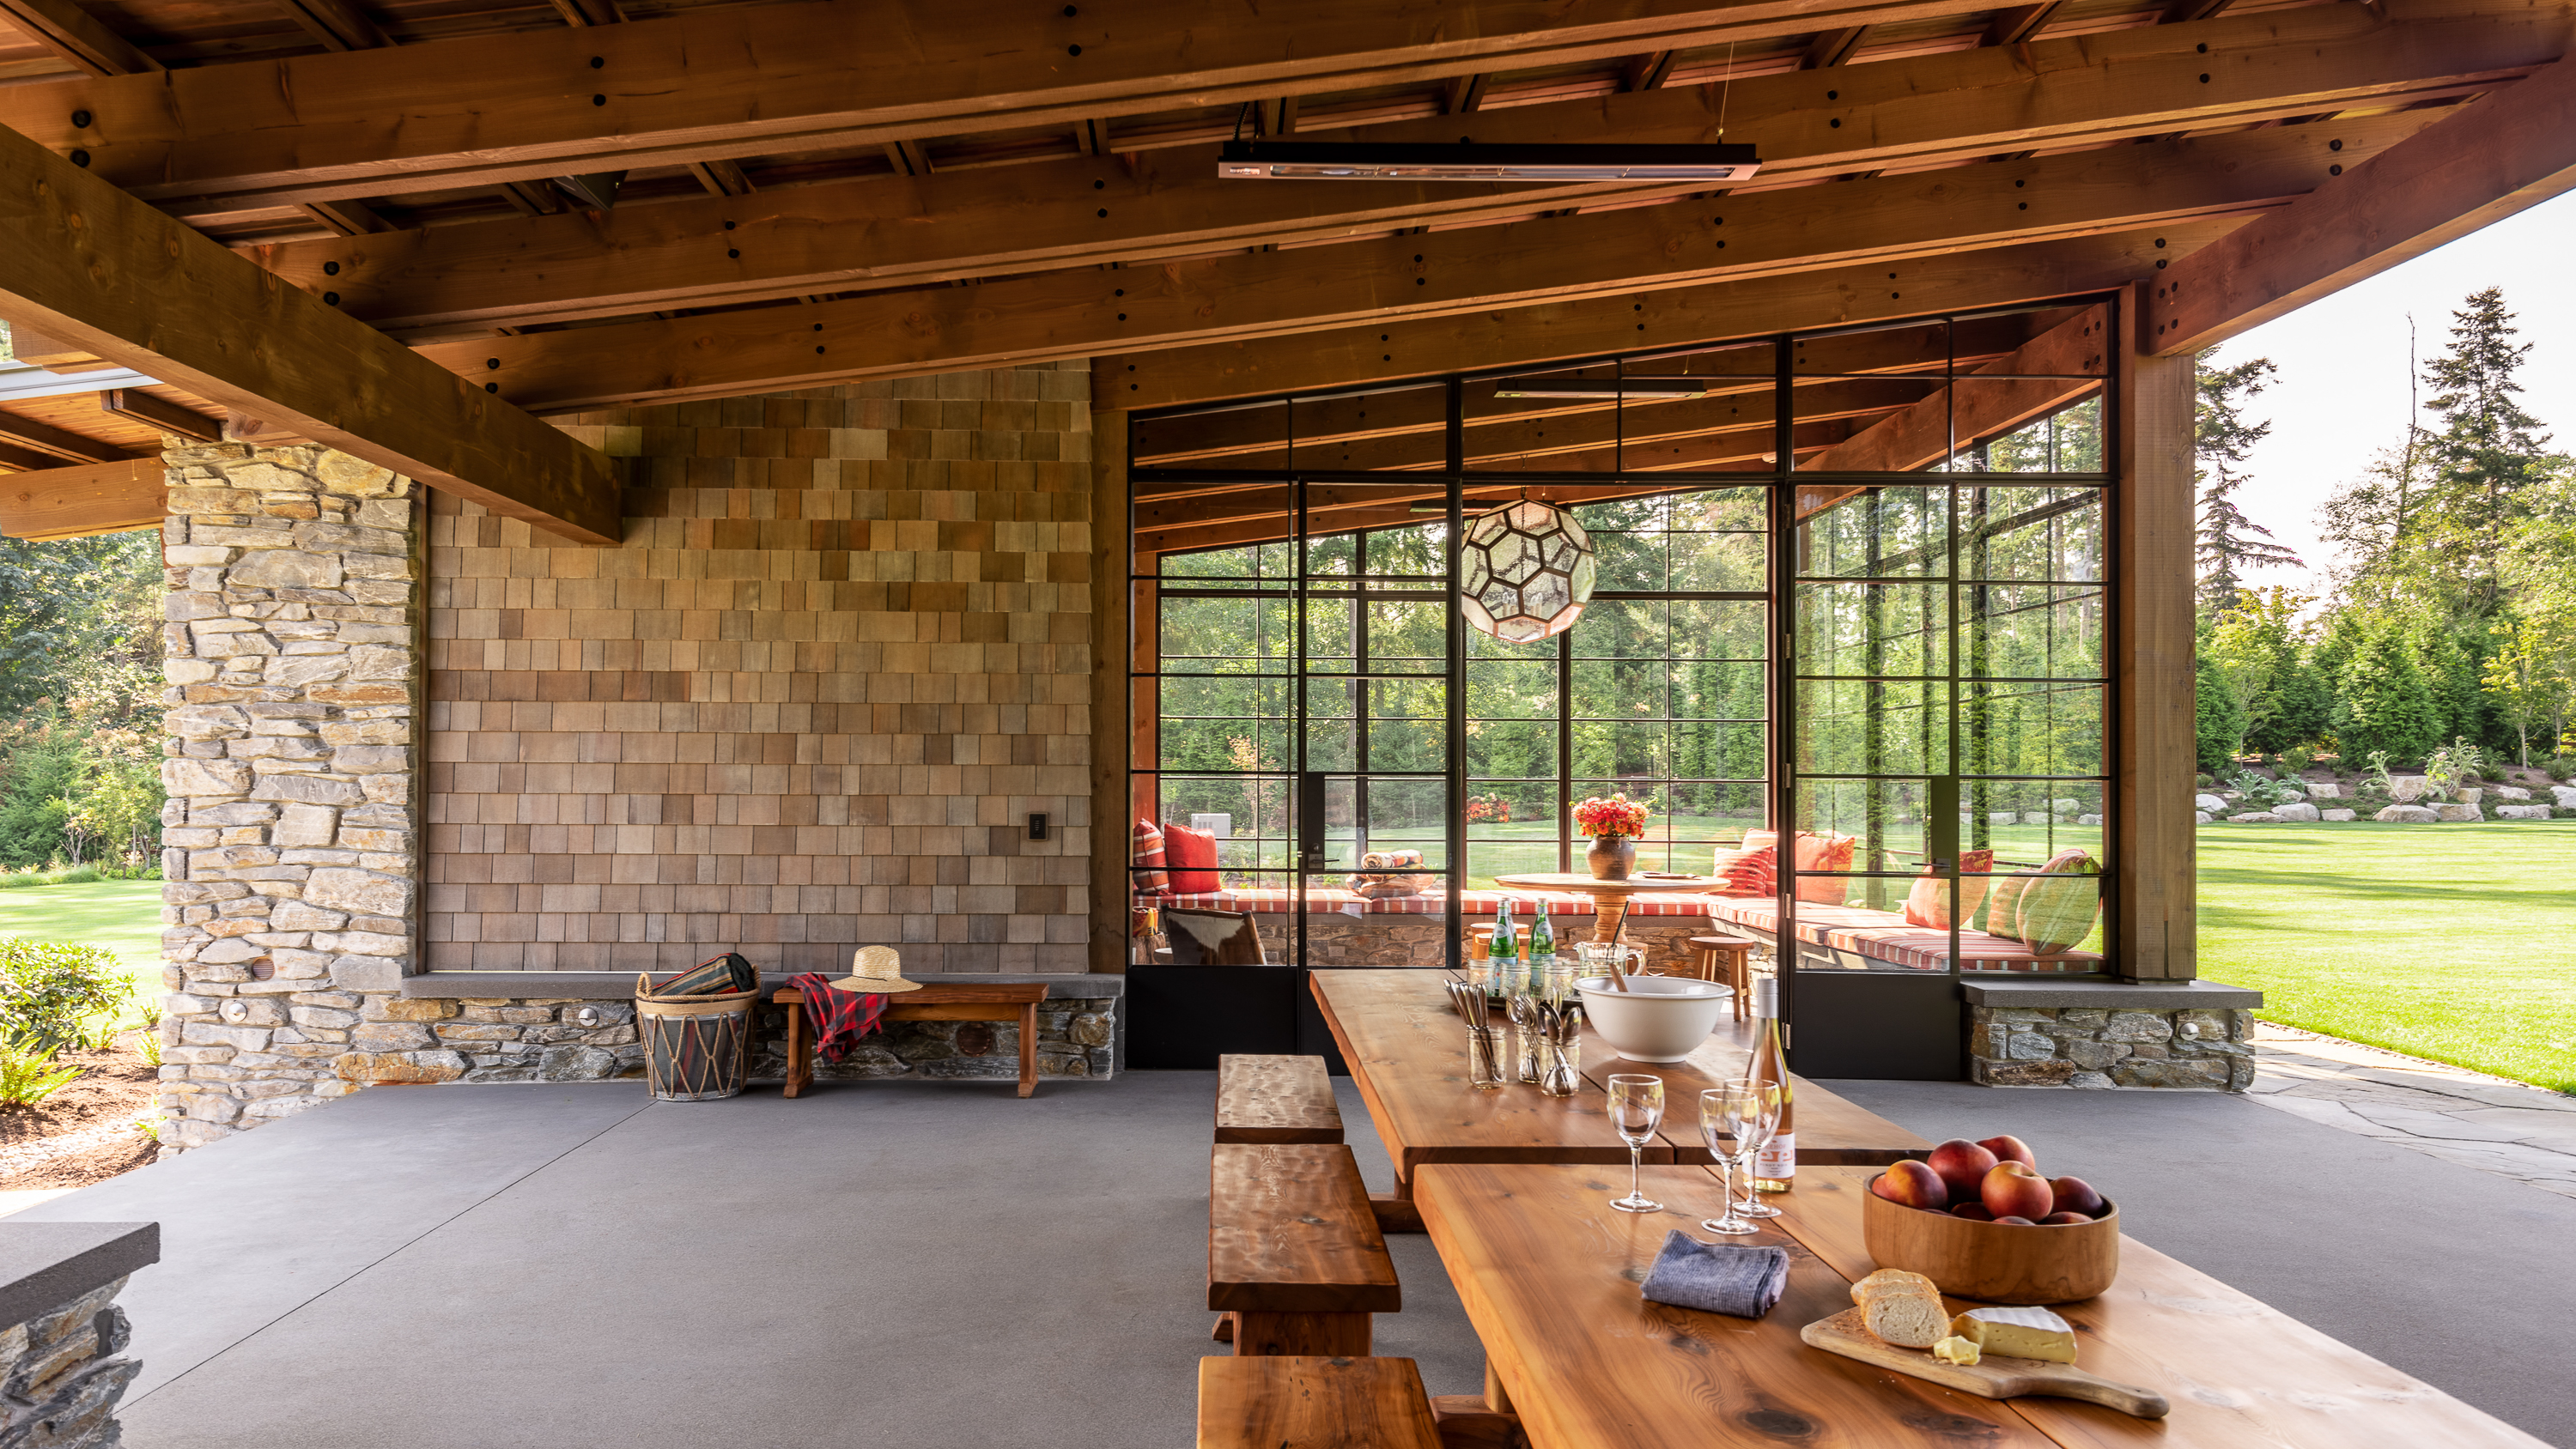 Materials are a hardy, outdoor spec—concrete floors, stone from nearby Vancouver Island, Doug fir from the Pacific Northwest, Western red cedar shingles and clear cedar paneling—all topped by a durable standing seam metal roof.